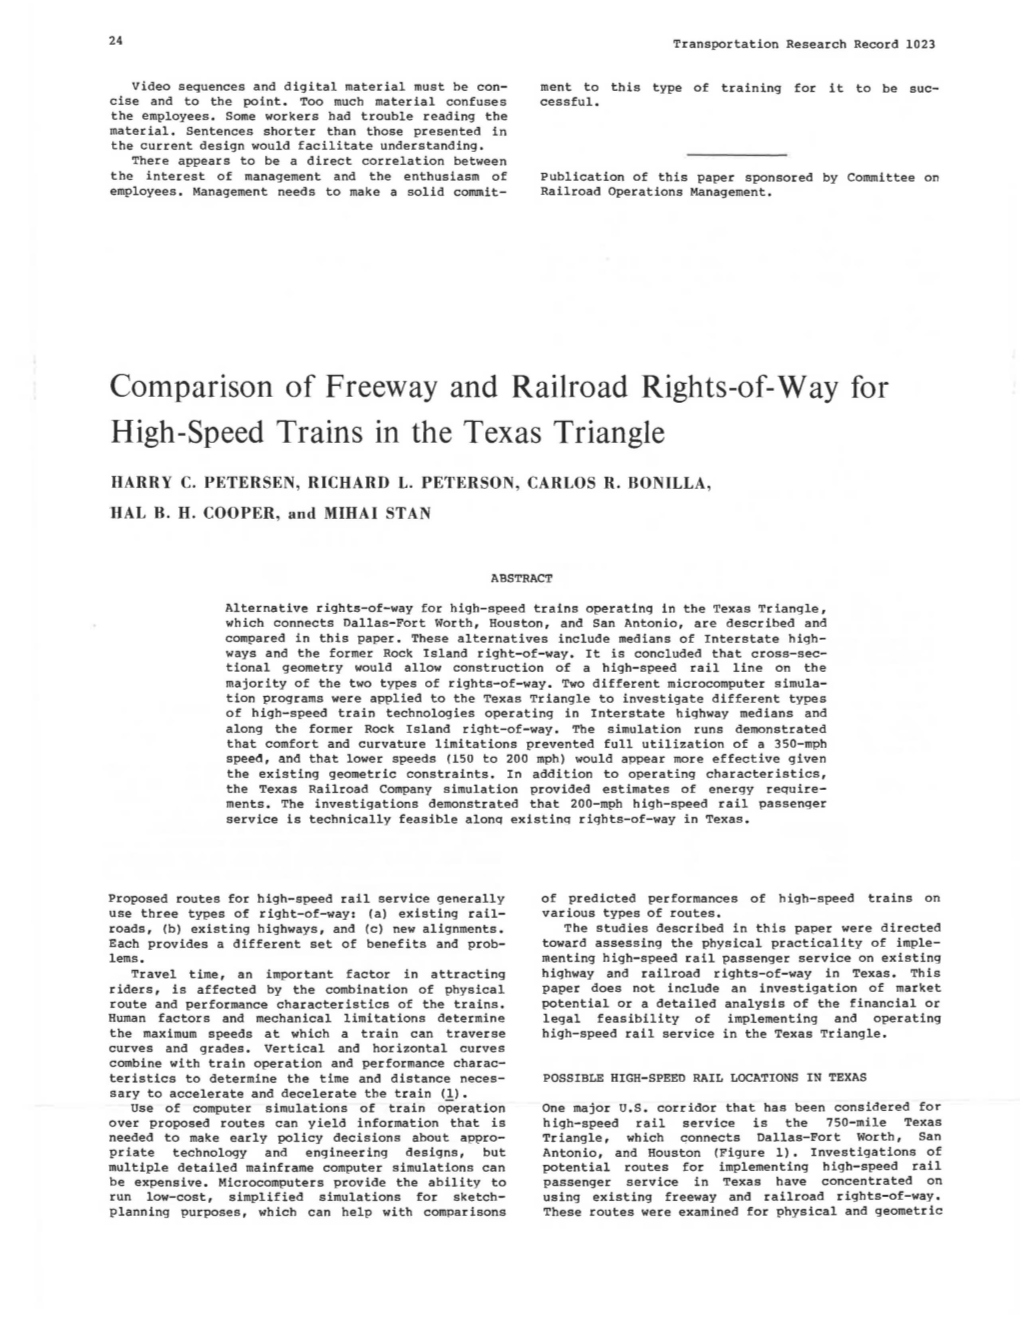 Comparison of Freeway and Railroad Rights-Of-Way for High-Speed Trains in the Texas Triangle